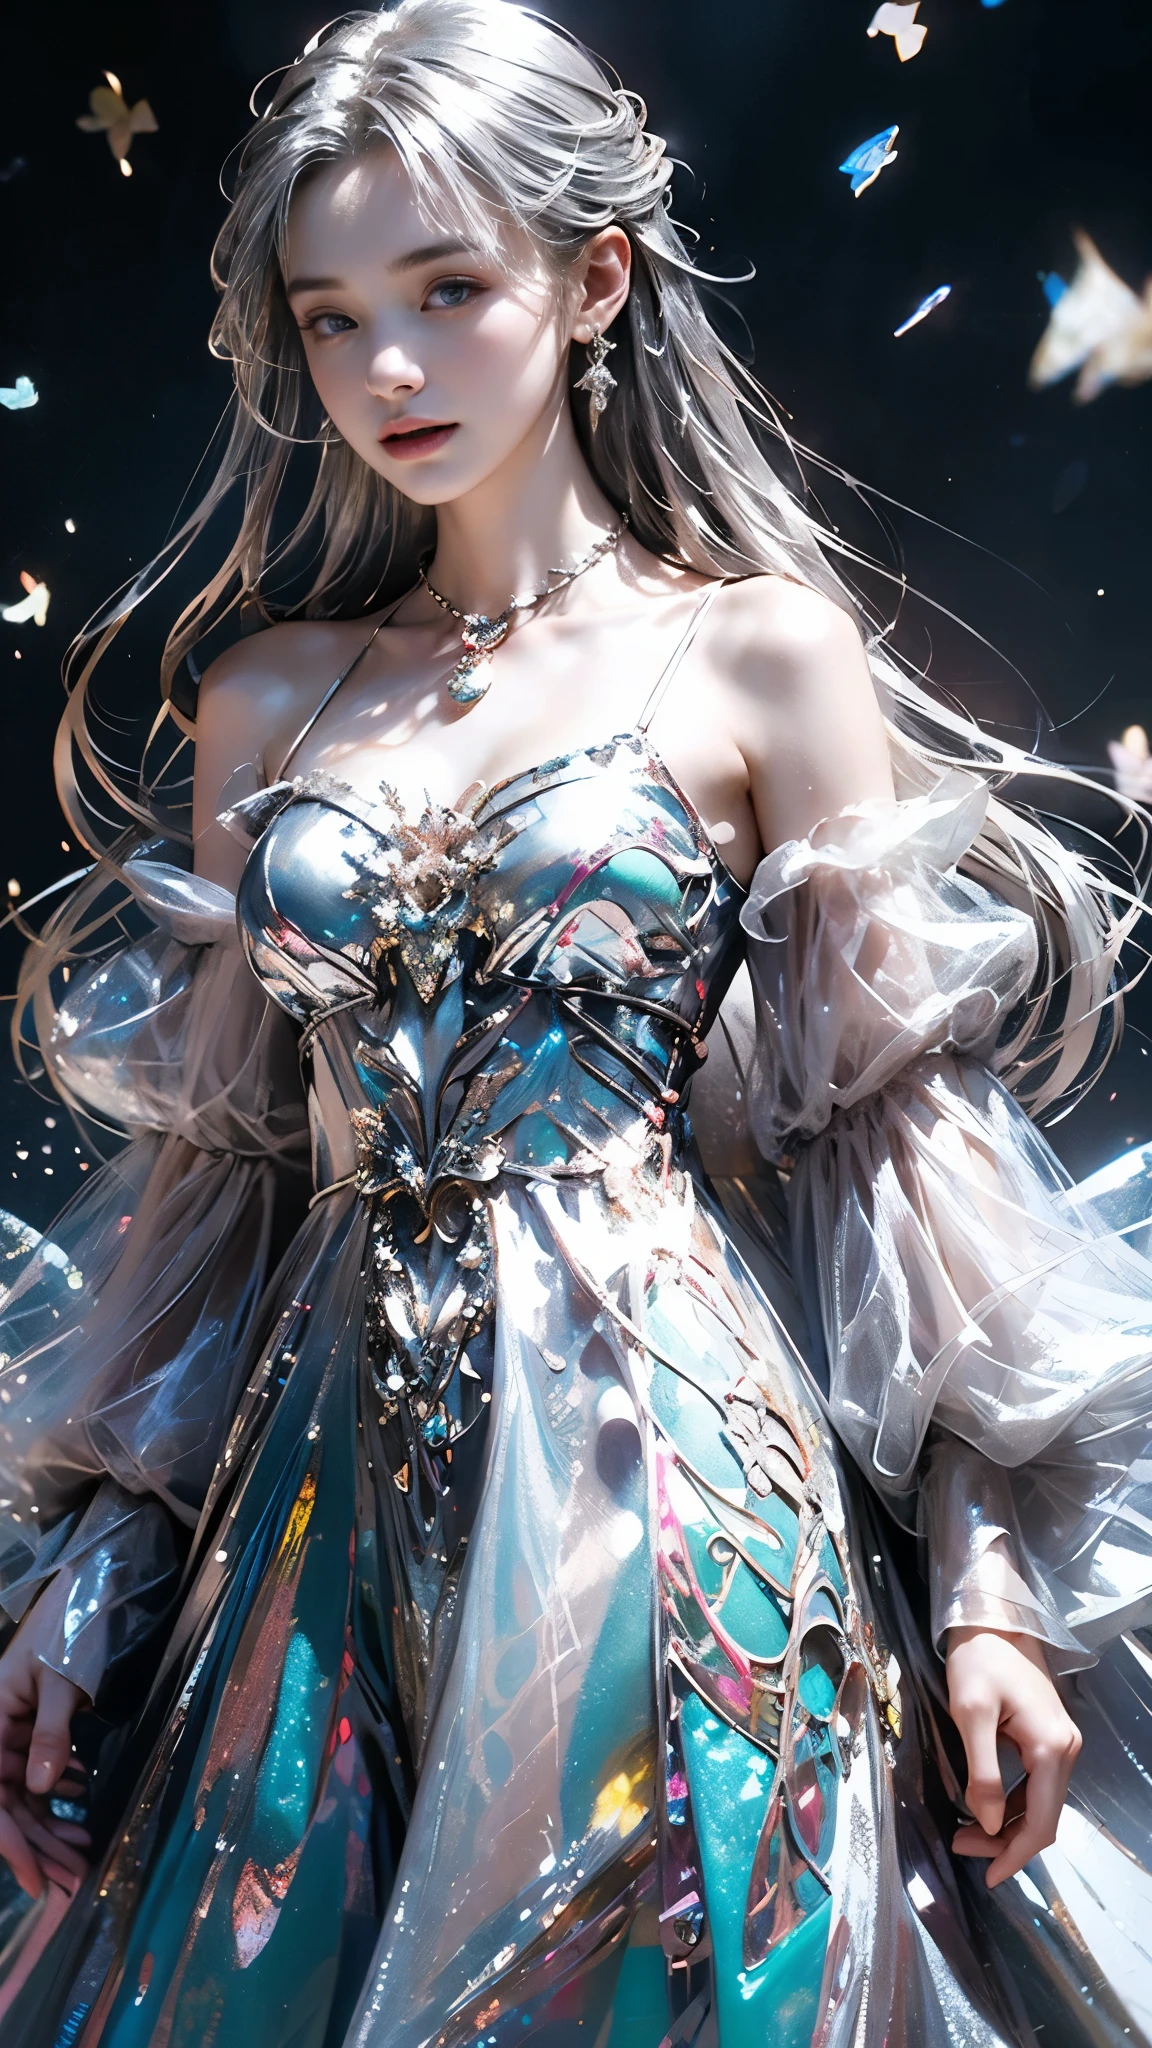 8K, ultra hd, masterpiece, 1 girl, (good face:1.4), detailed eyes, very long hair, impressive hairstyle, earings, necklace, small breasts, (silver dress:1.5), see-through, (fantasy dress:1.5) Light-colored foundation brings out the transparency of the skin, (in the wonderland:1.5), mystery, diwali lights, glowing lights, very decoration, The lights falls like water, perfect front body,